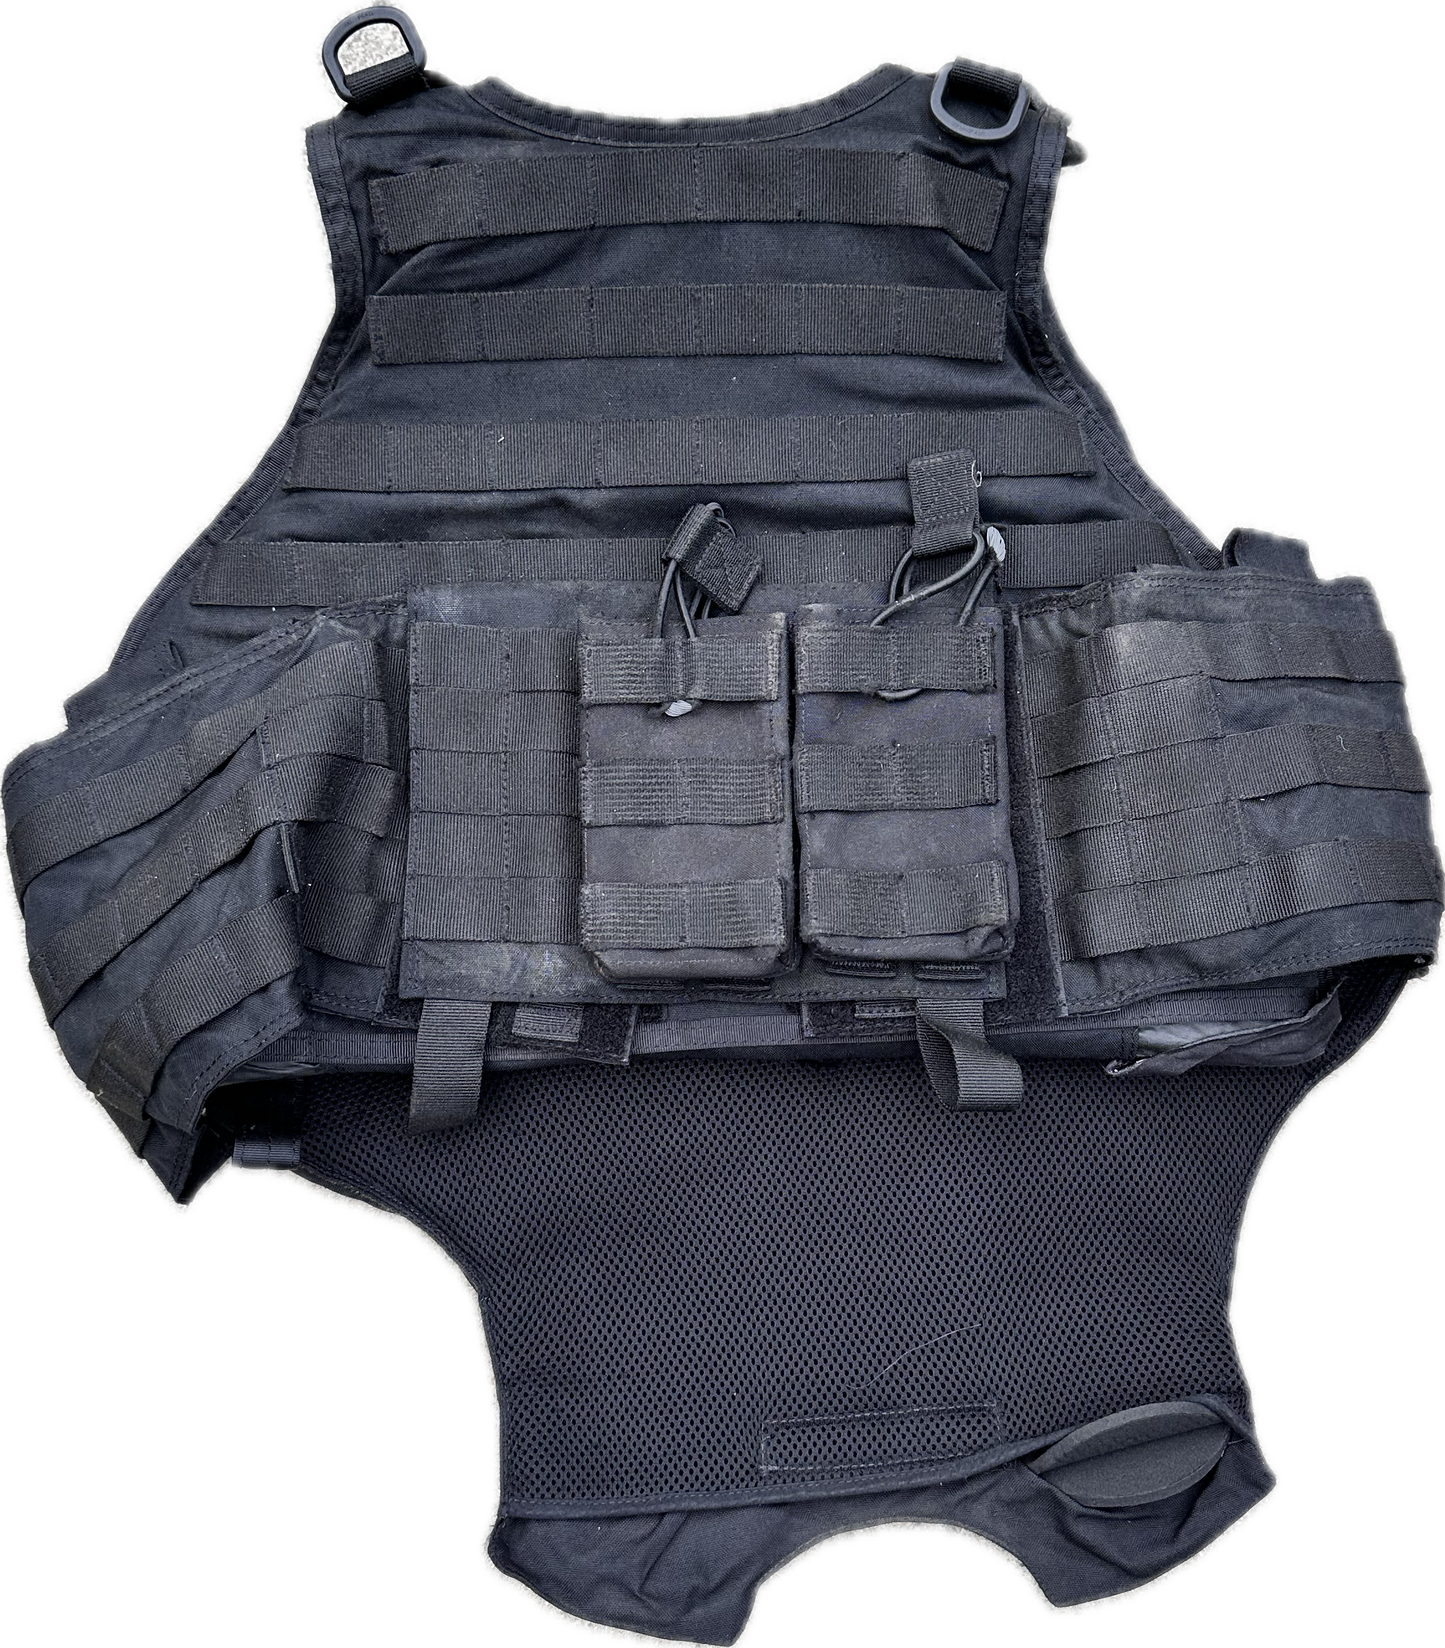 SONS OF ANARCHY: Jax Teller Bulletproof Tactical Vest with Ammunition Pouches